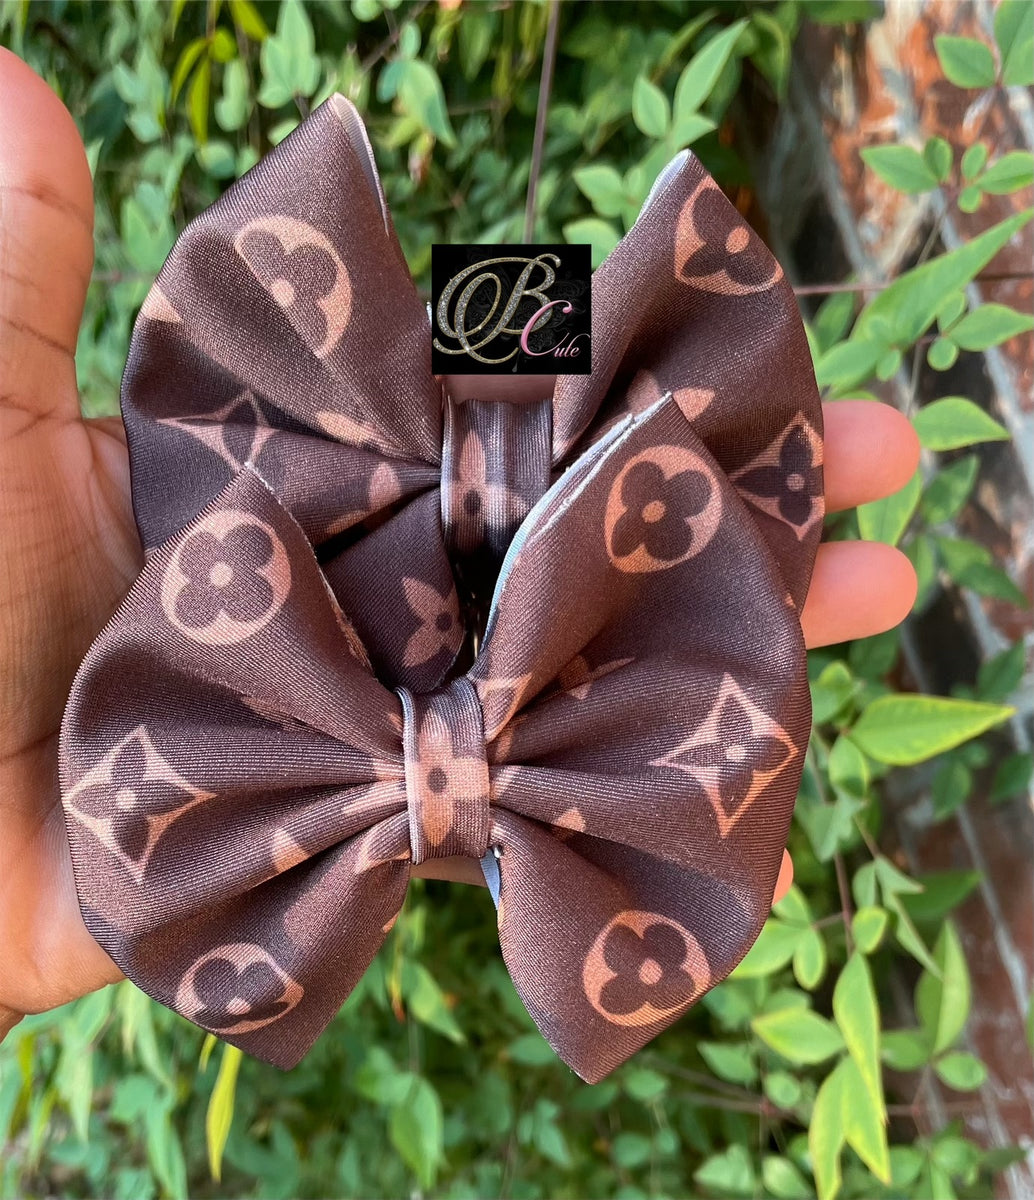 LV Bling Bow  Made by Miss E